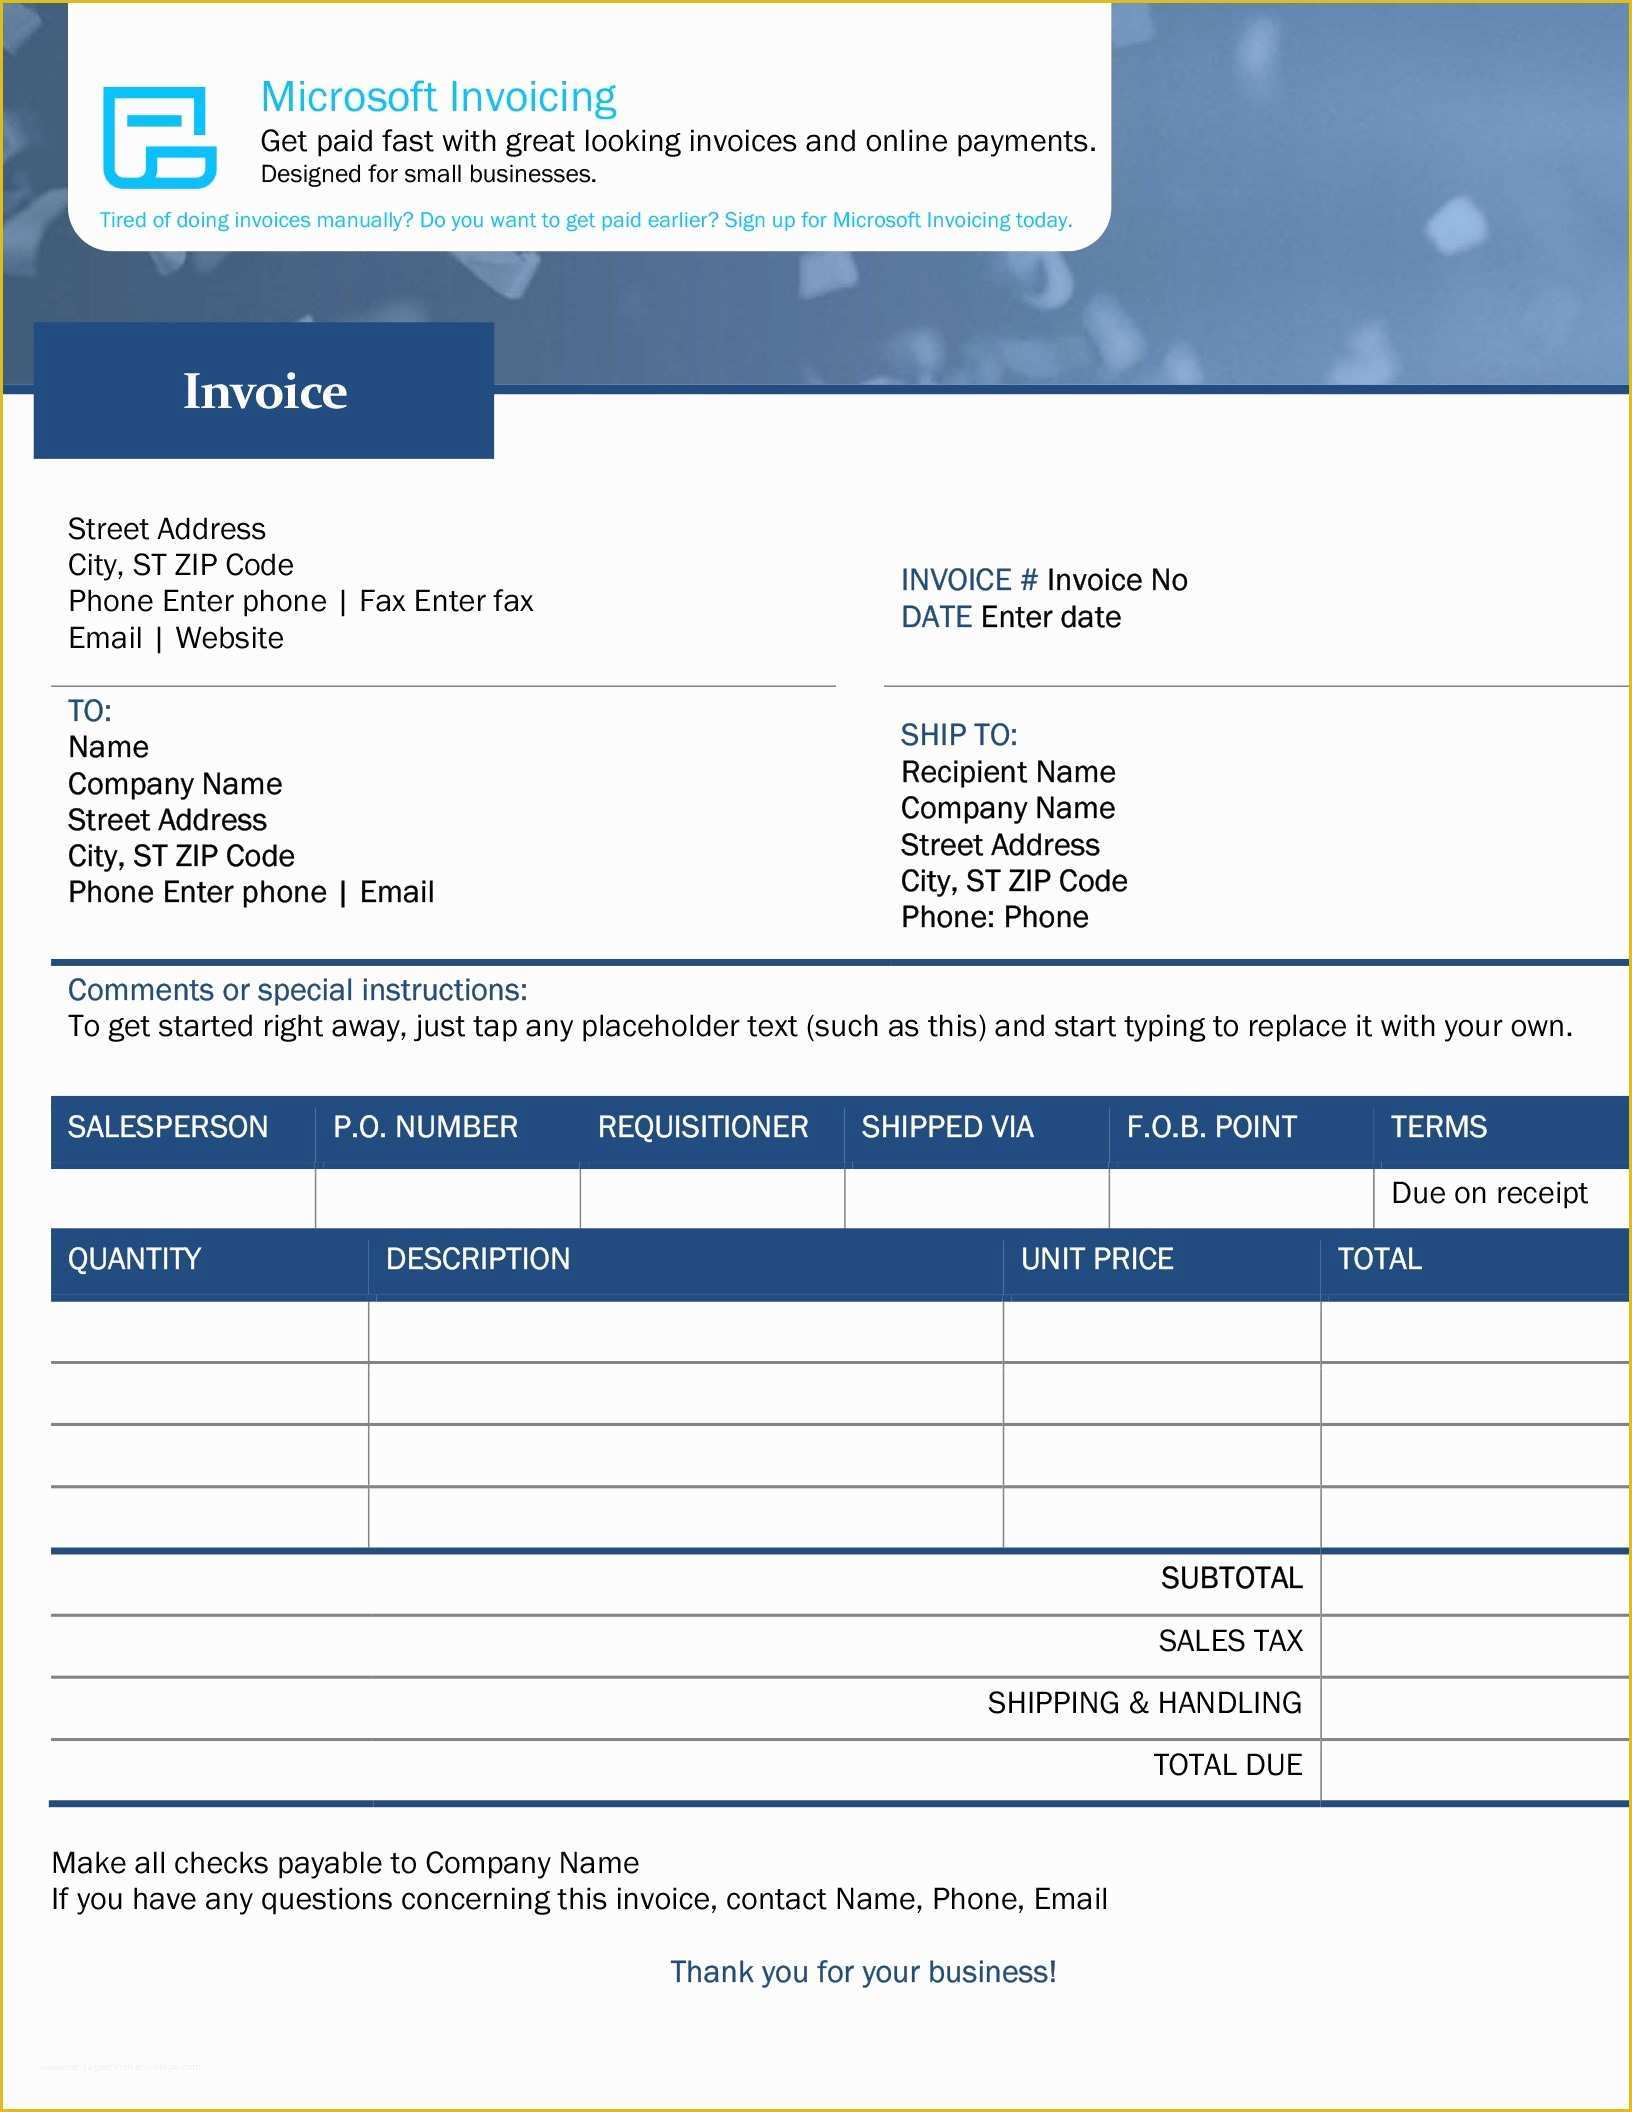 Invoice Template Free Download Windows Of Invoice with Microsoft Invoicing